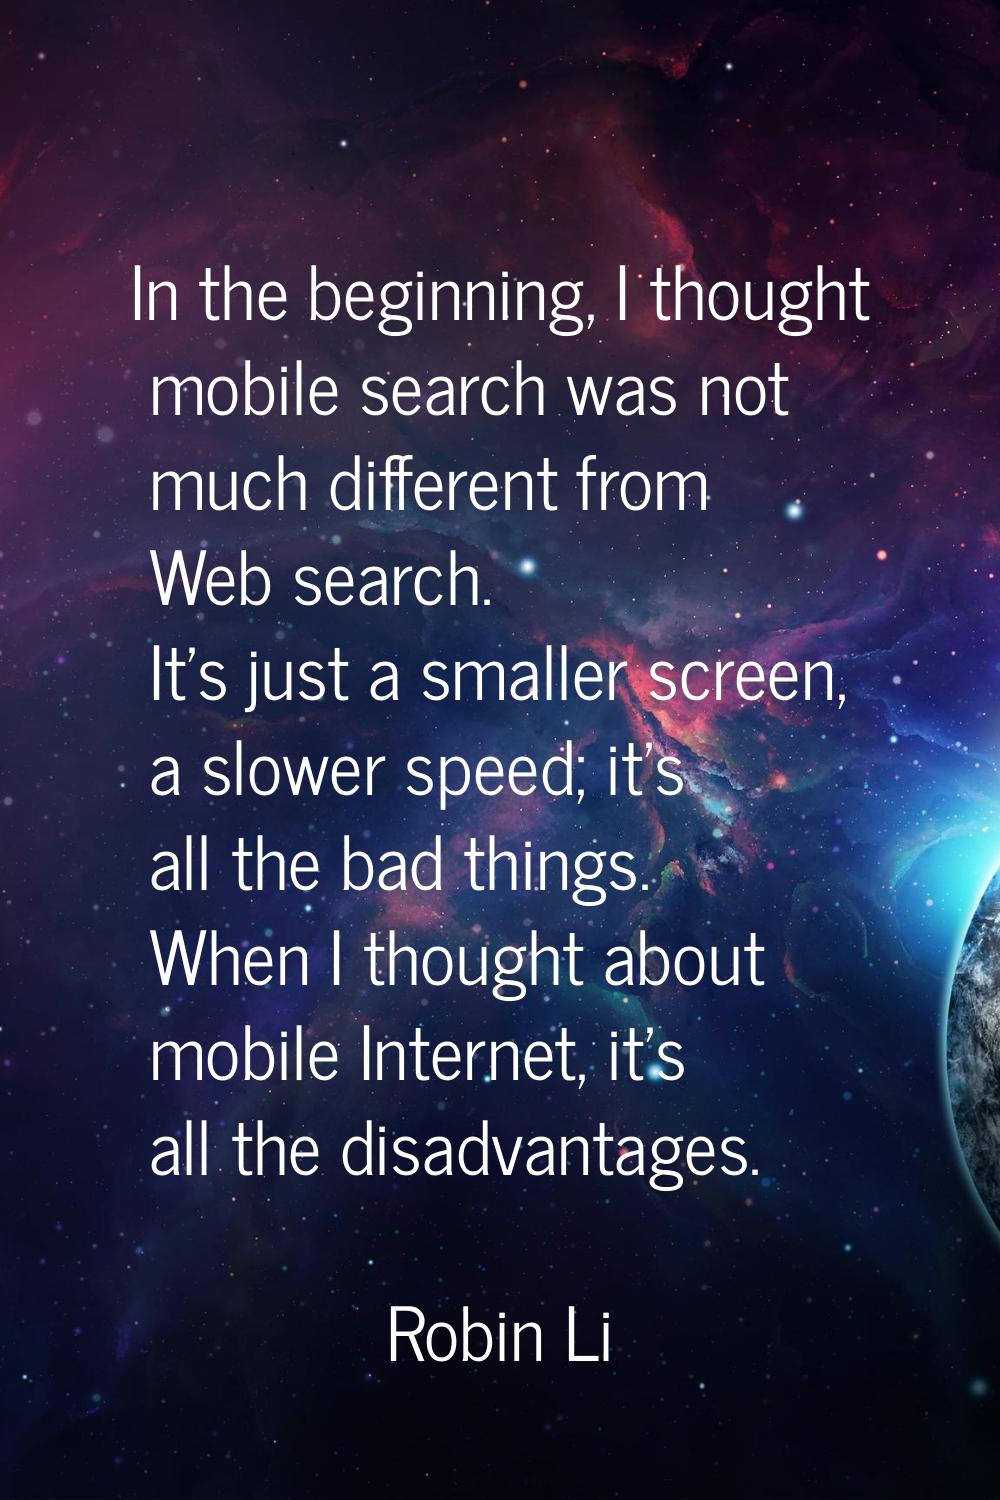 In the beginning, I thought mobile search was not much different from Web search. It's just a small